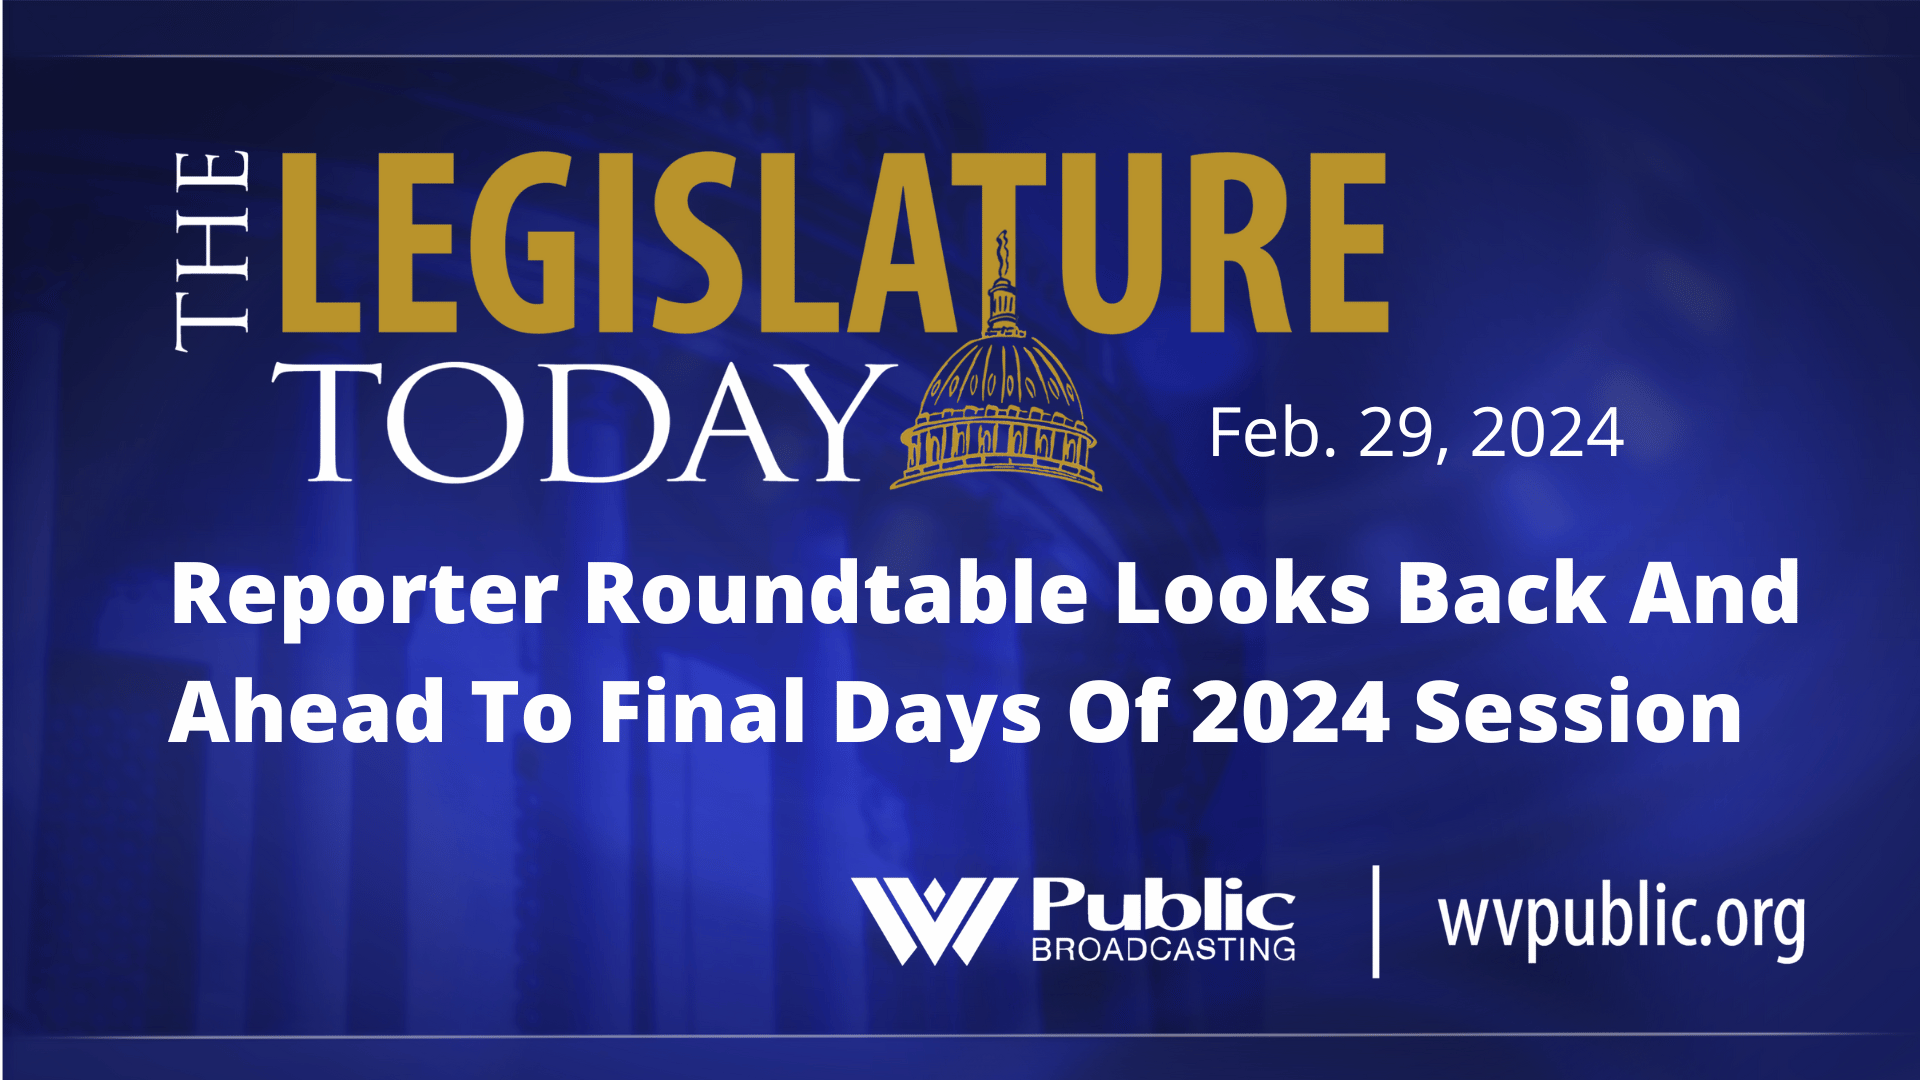 Reporter Roundtable Looks Back And Ahead To Final Days Of 2024 Session